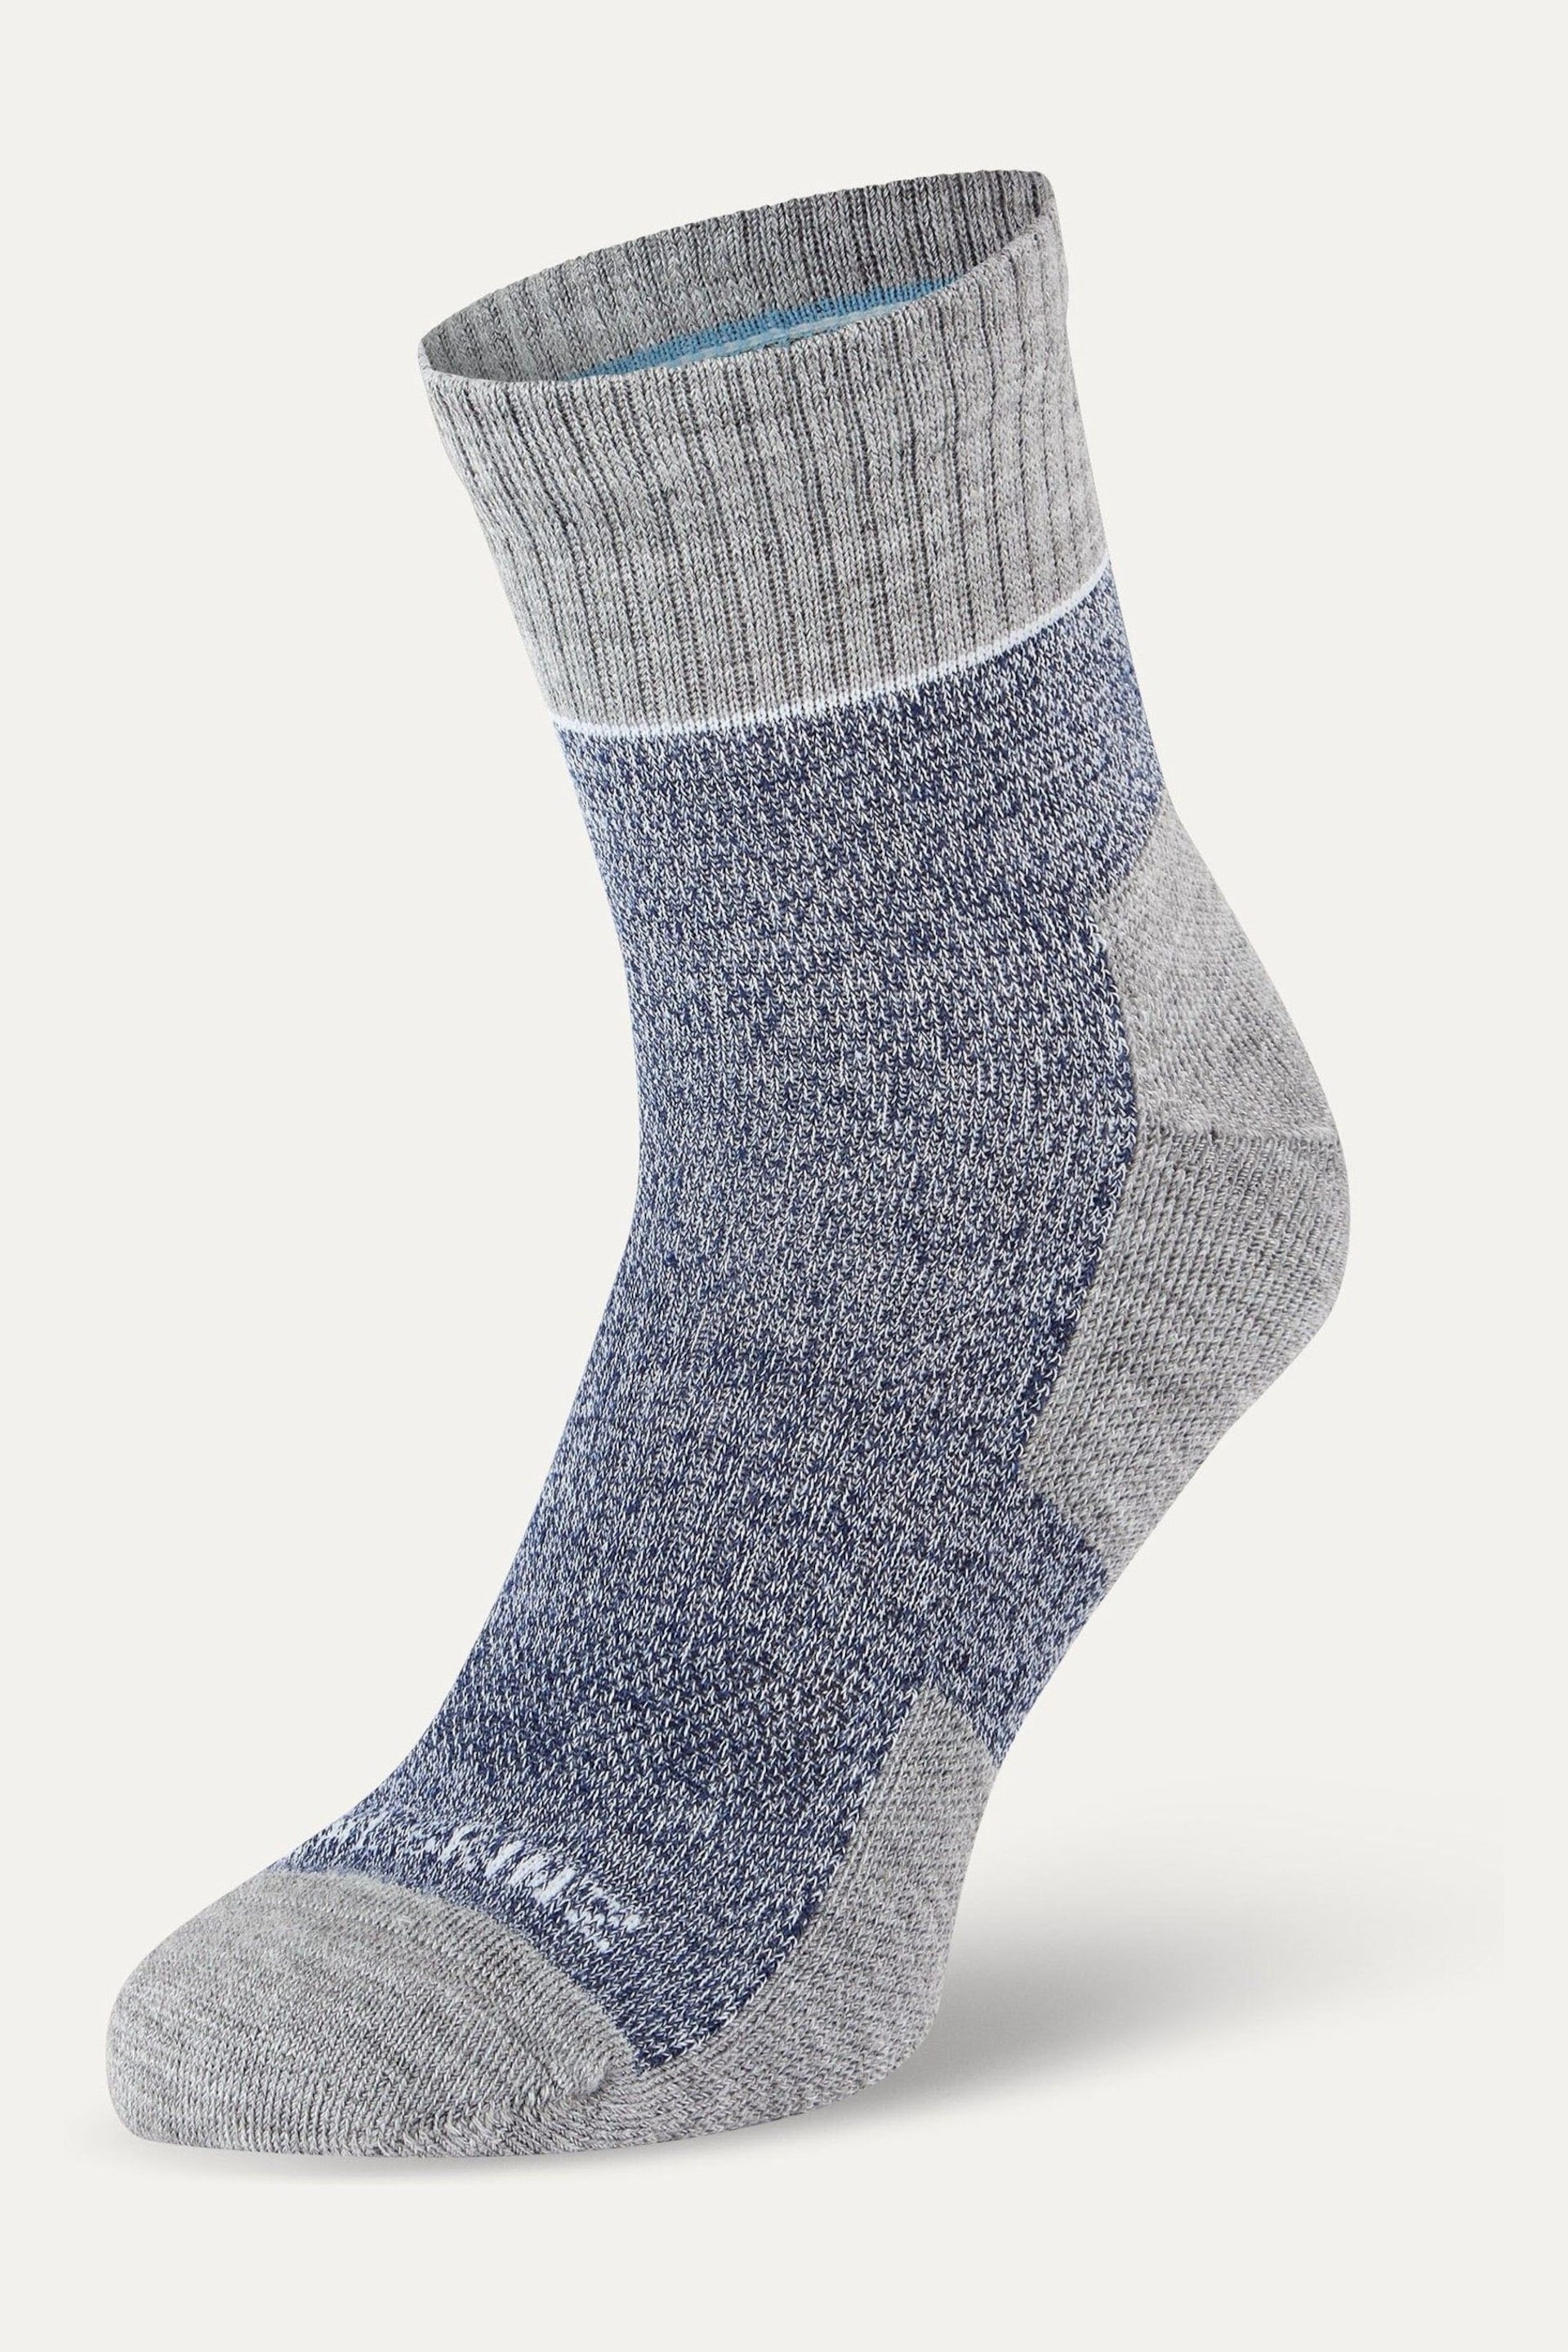 Sealskinz Morston Non-Waterproof Quickdry Ankle Length Socks - Image 1 of 2